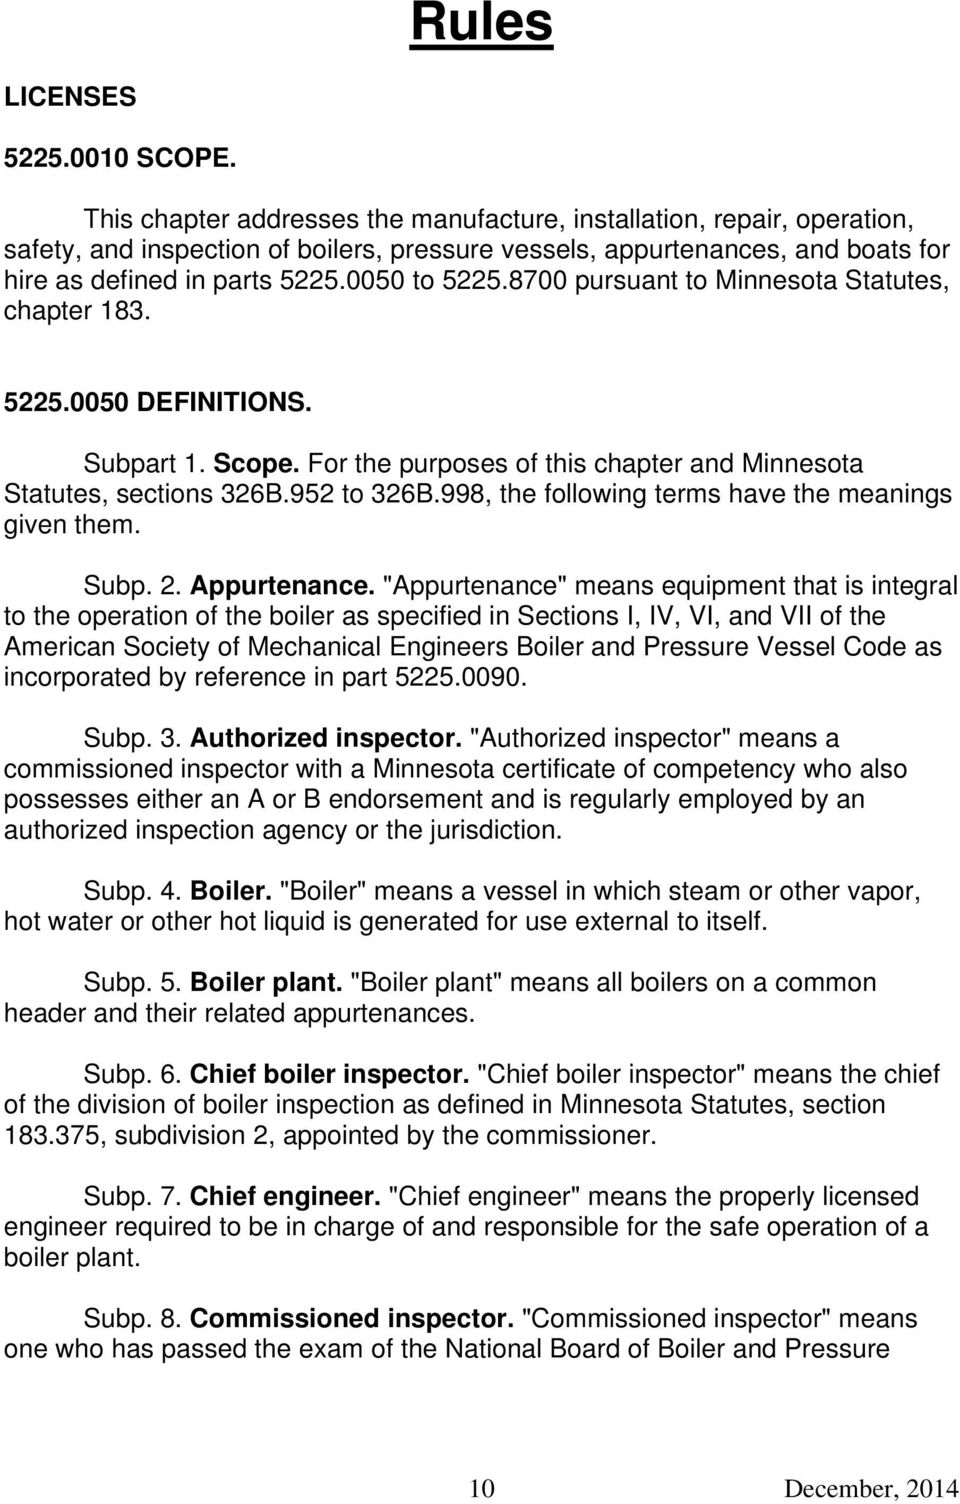 8700 pursuant to Minnesota Statutes, chapter 183. 5225.0050 DEFINITIONS. Subpart 1. Scope. For the purposes of this chapter and Minnesota Statutes, sections 326B.952 to 326B.